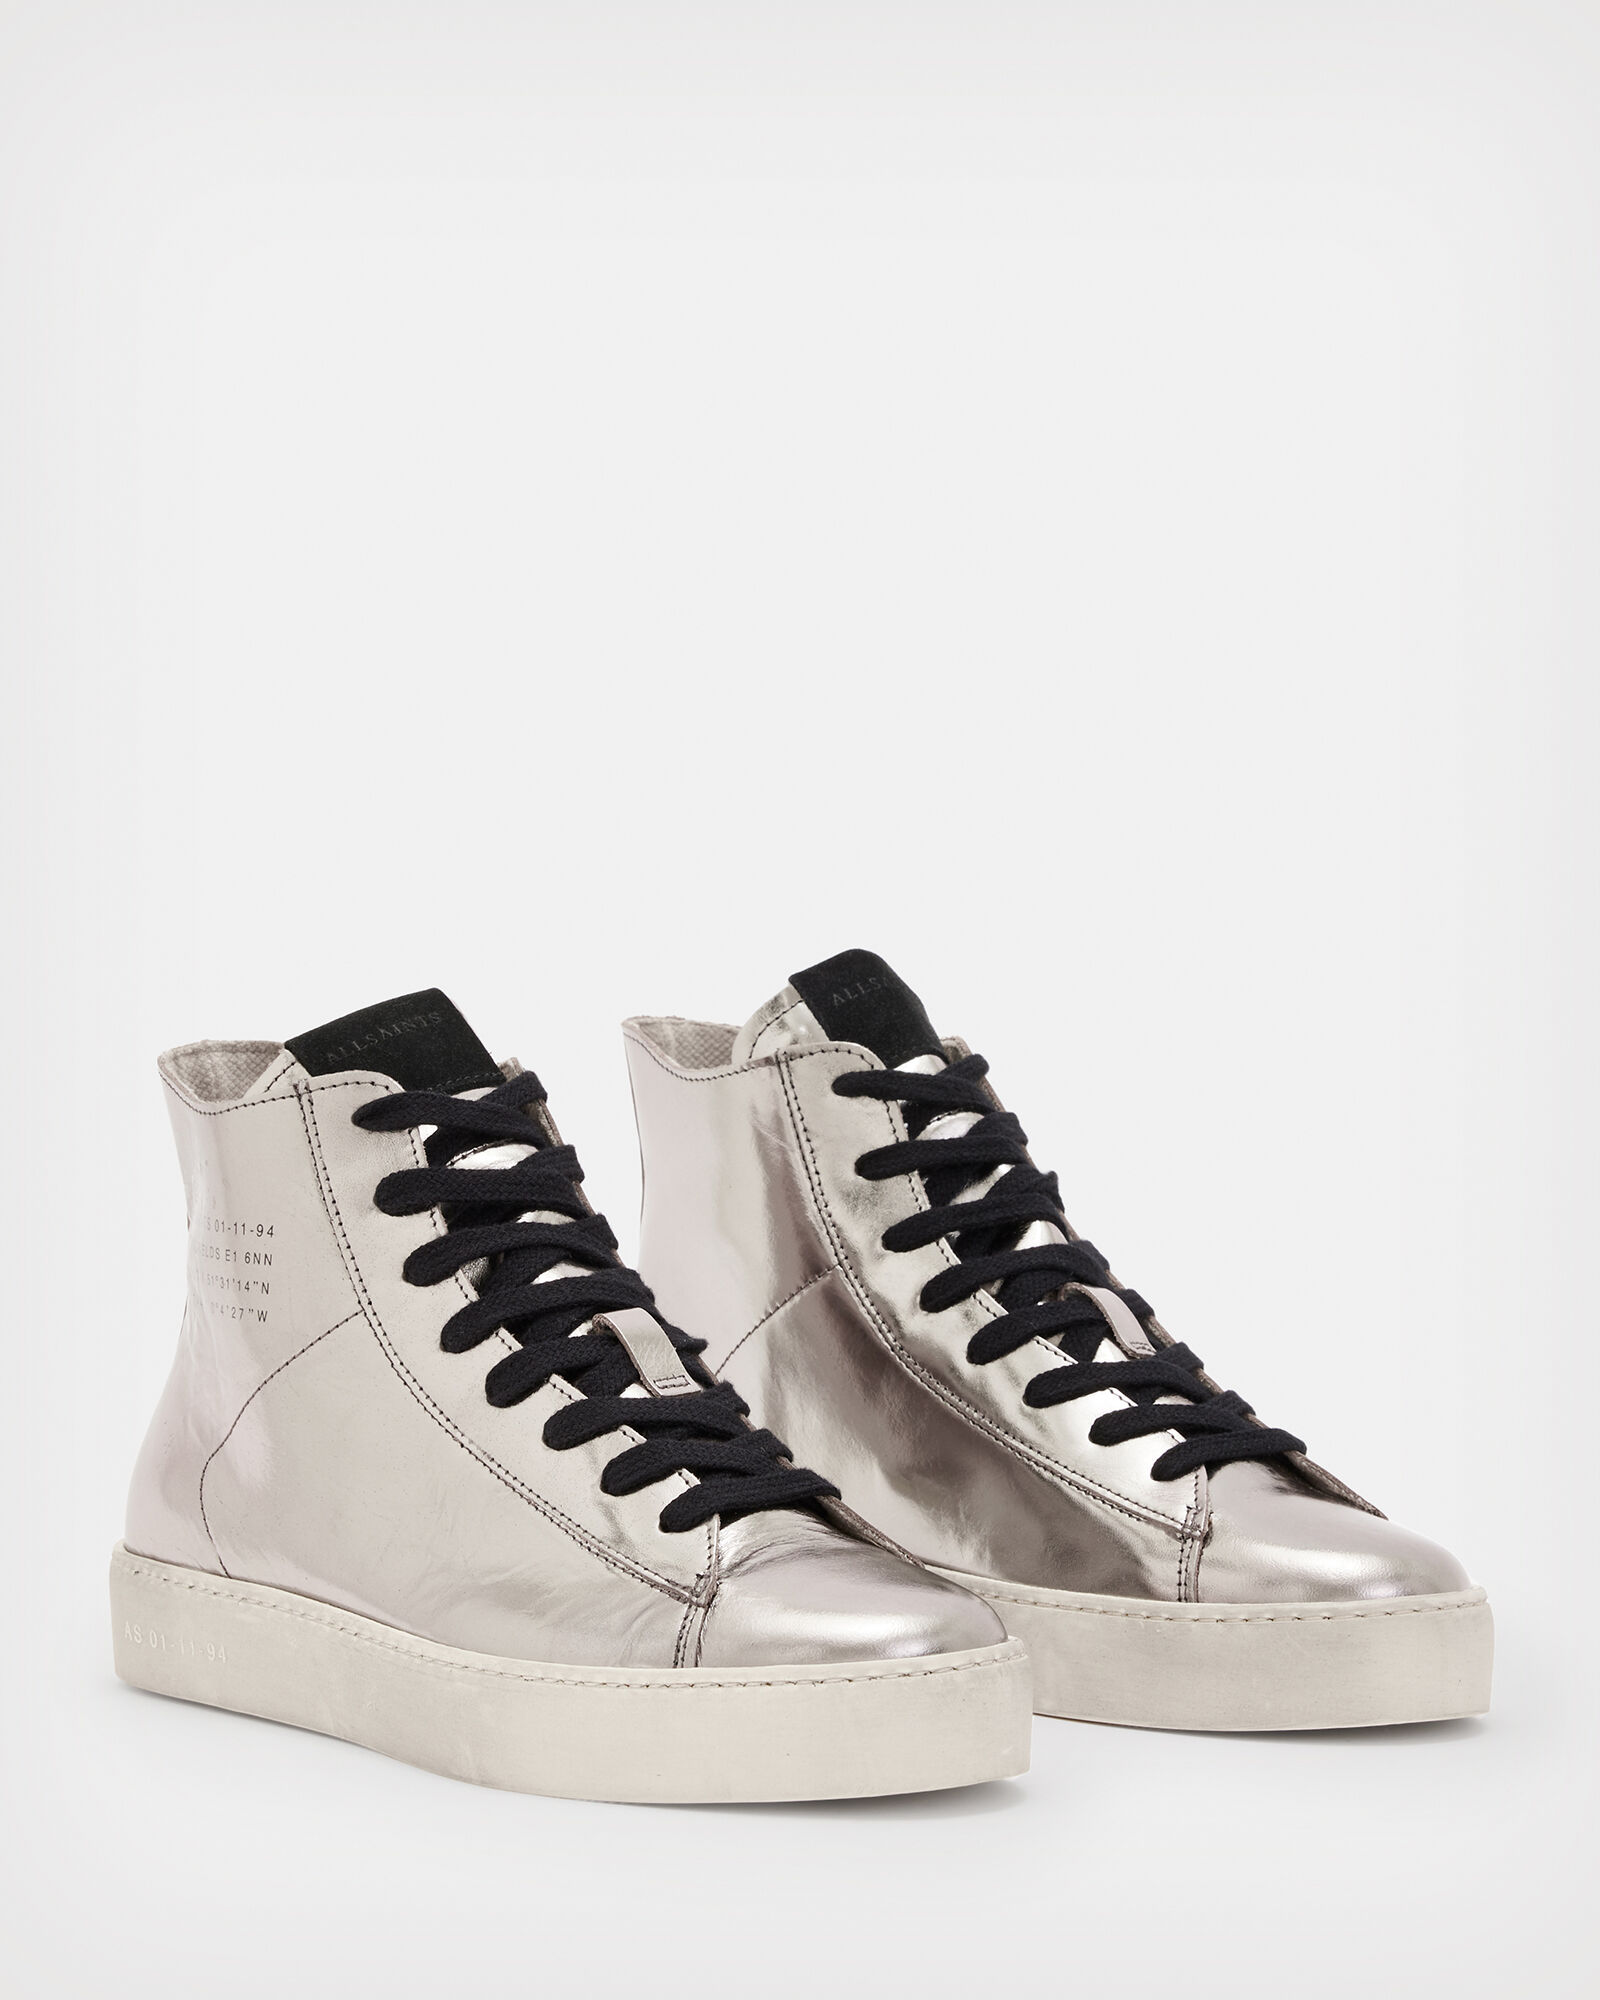 Tana Metallic Leather High Top Trainers Silver | ALLSAINTS Canada